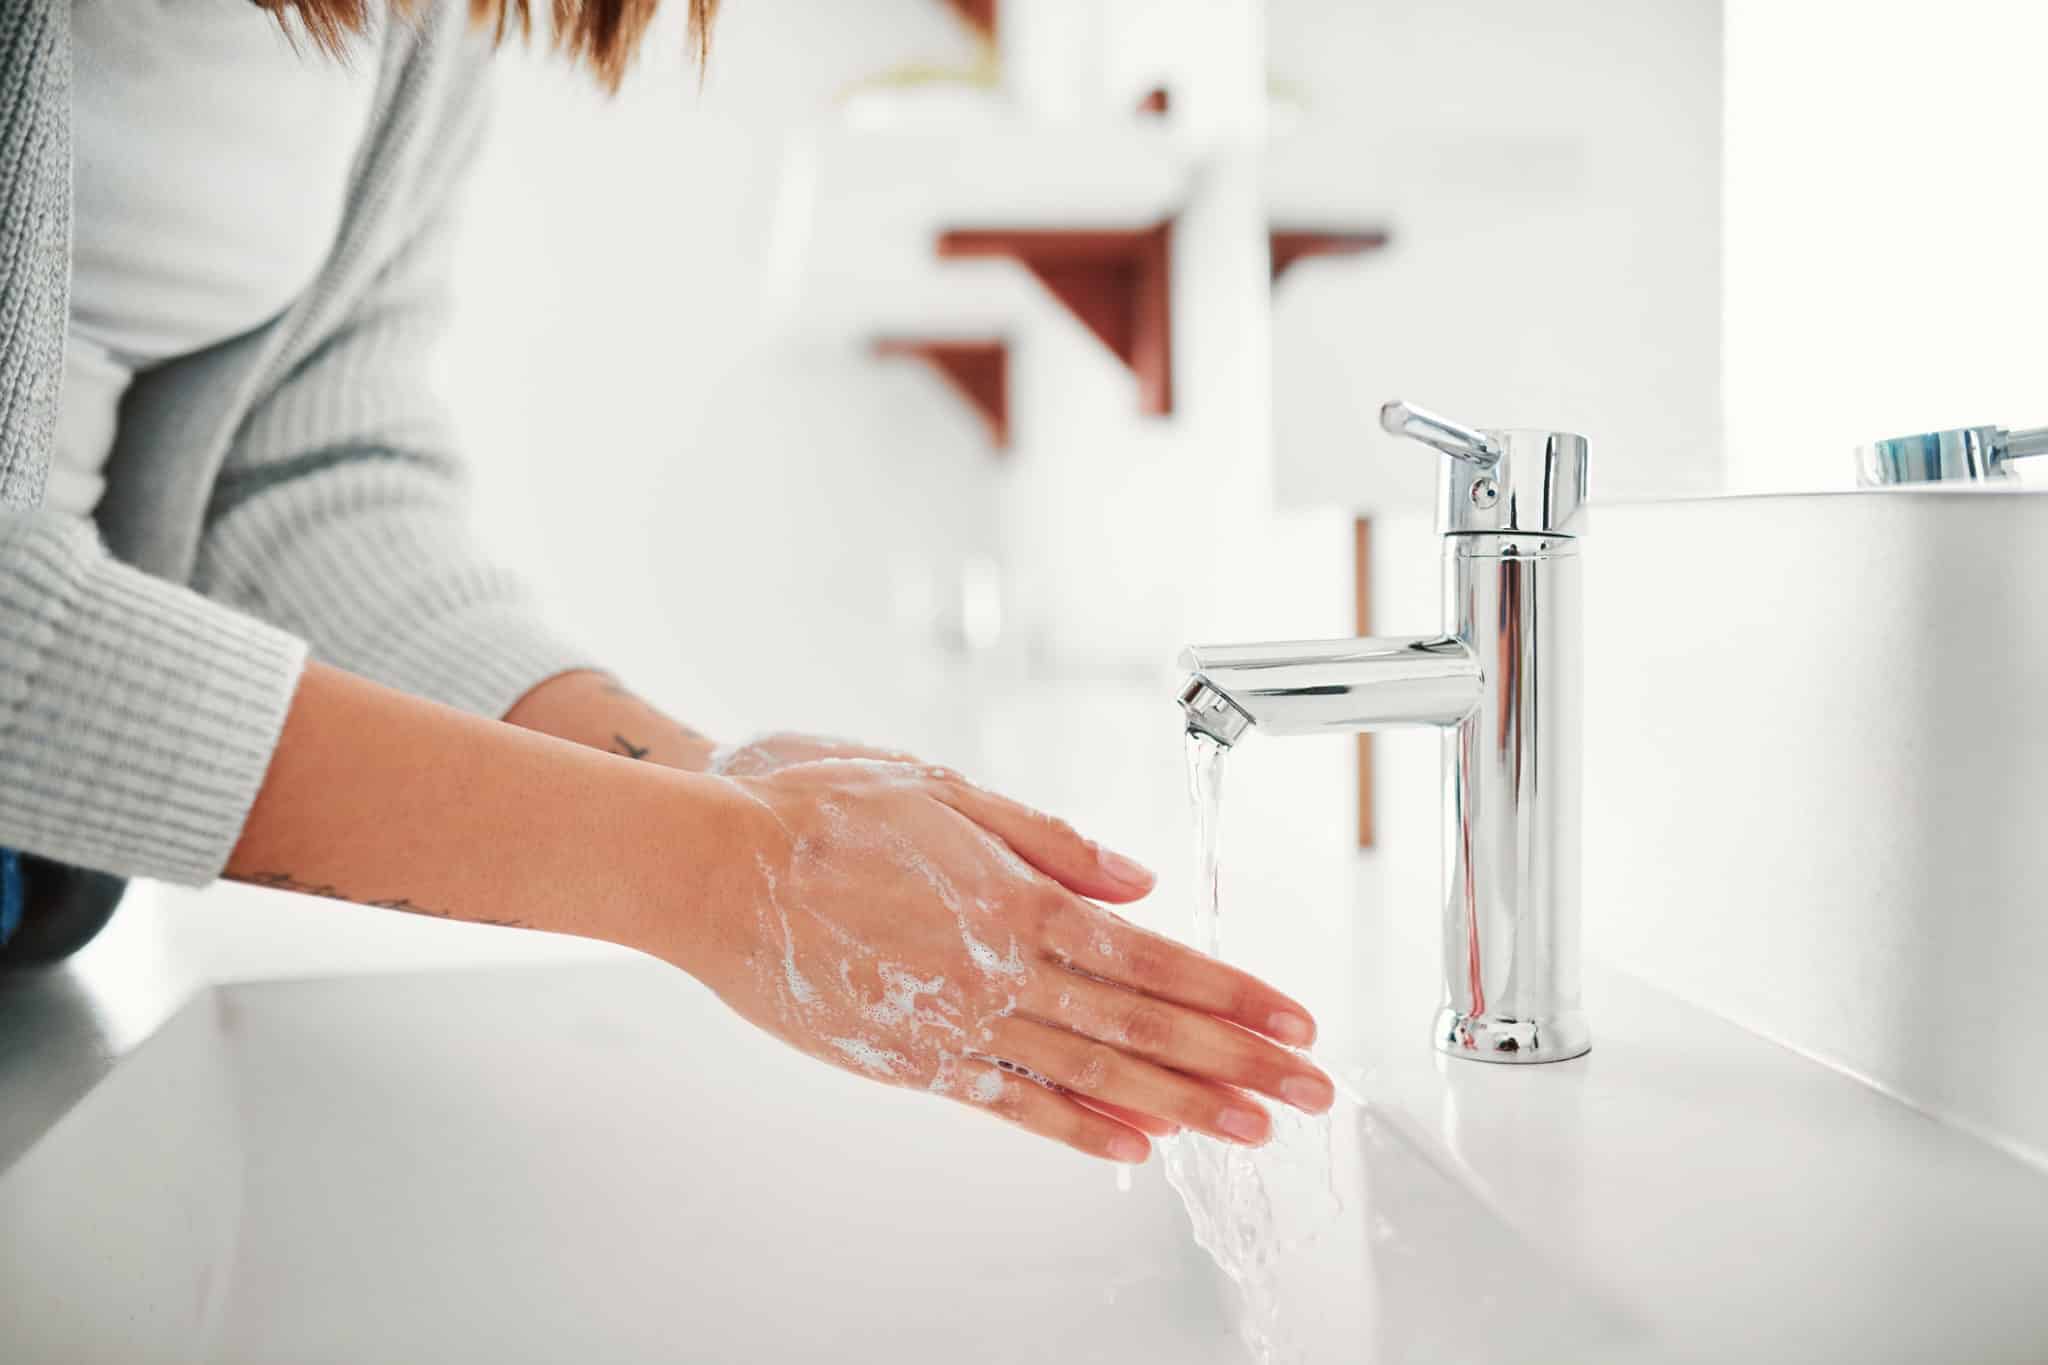 Wash your hands regularly to keep the germs away